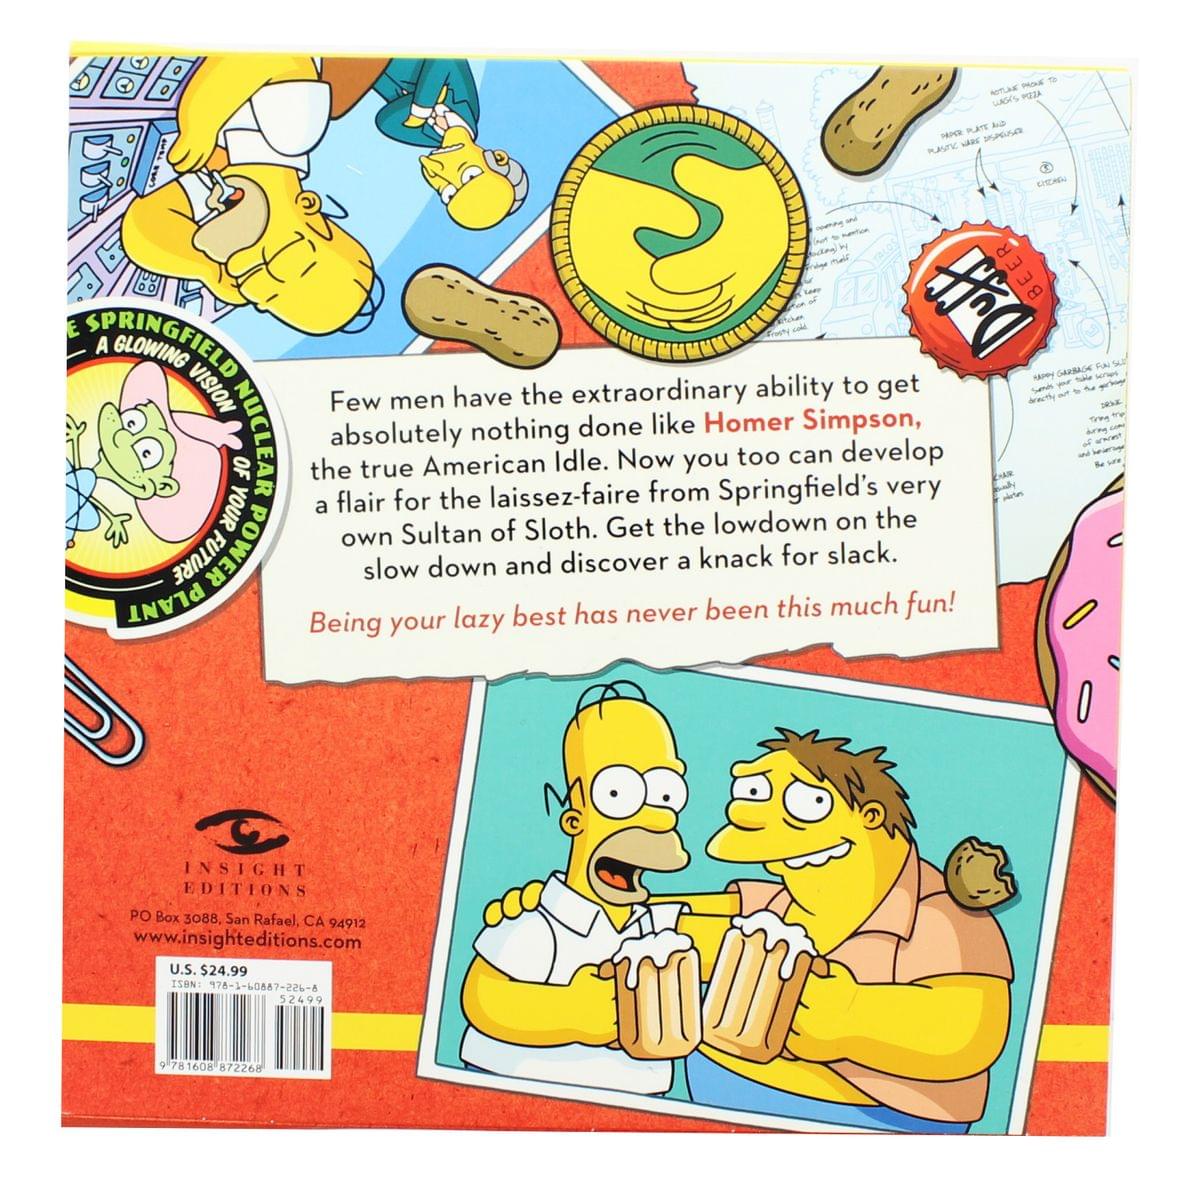 The Simpsons Homer's Little Book of Laziness (Vault of Simpsonology Series)